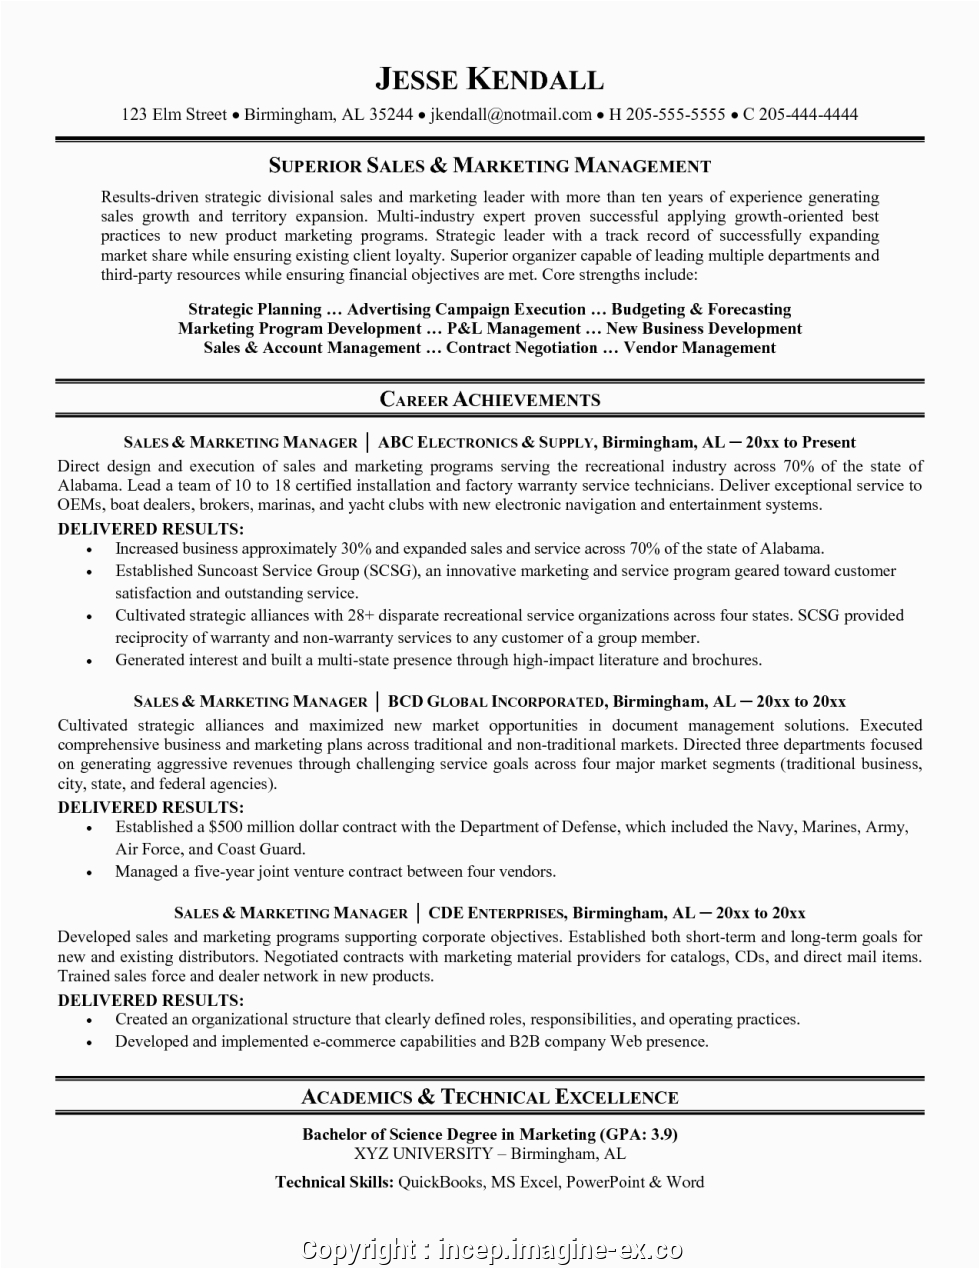 Sample Resume for Sales and Marketing Manager Downloadable Sales and Marketing Manager Cv Sample